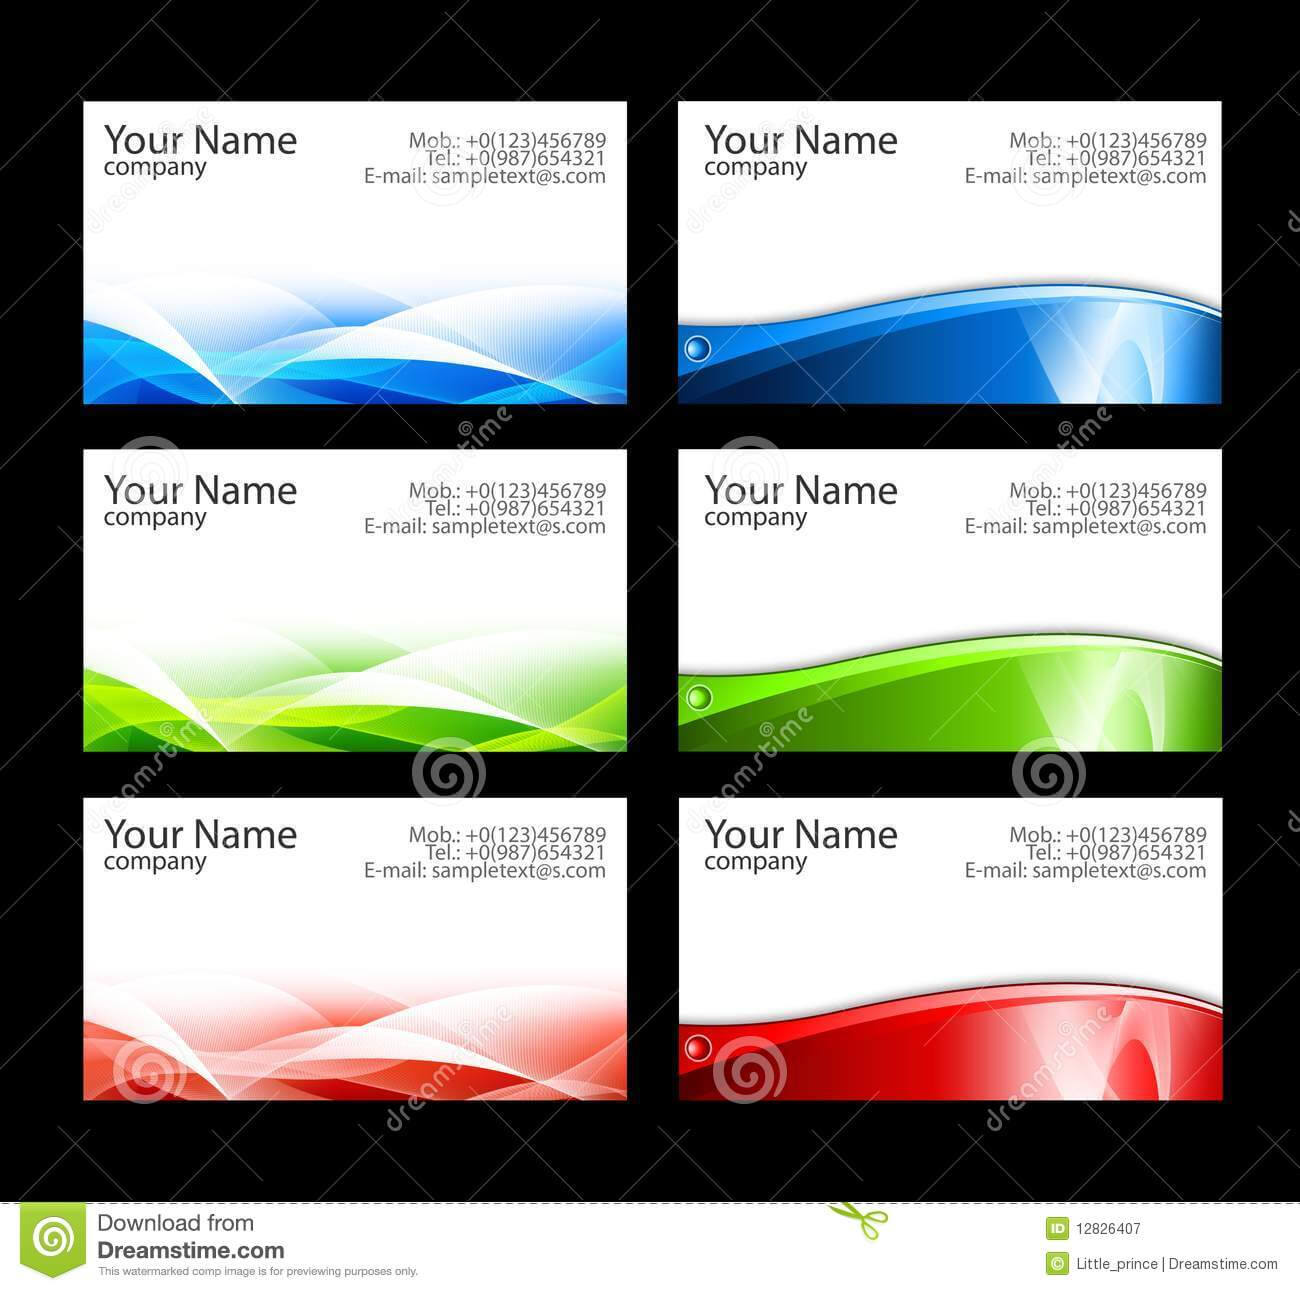 15 Free Avery Business Card Templates Images – Free Business For Call Card Templates